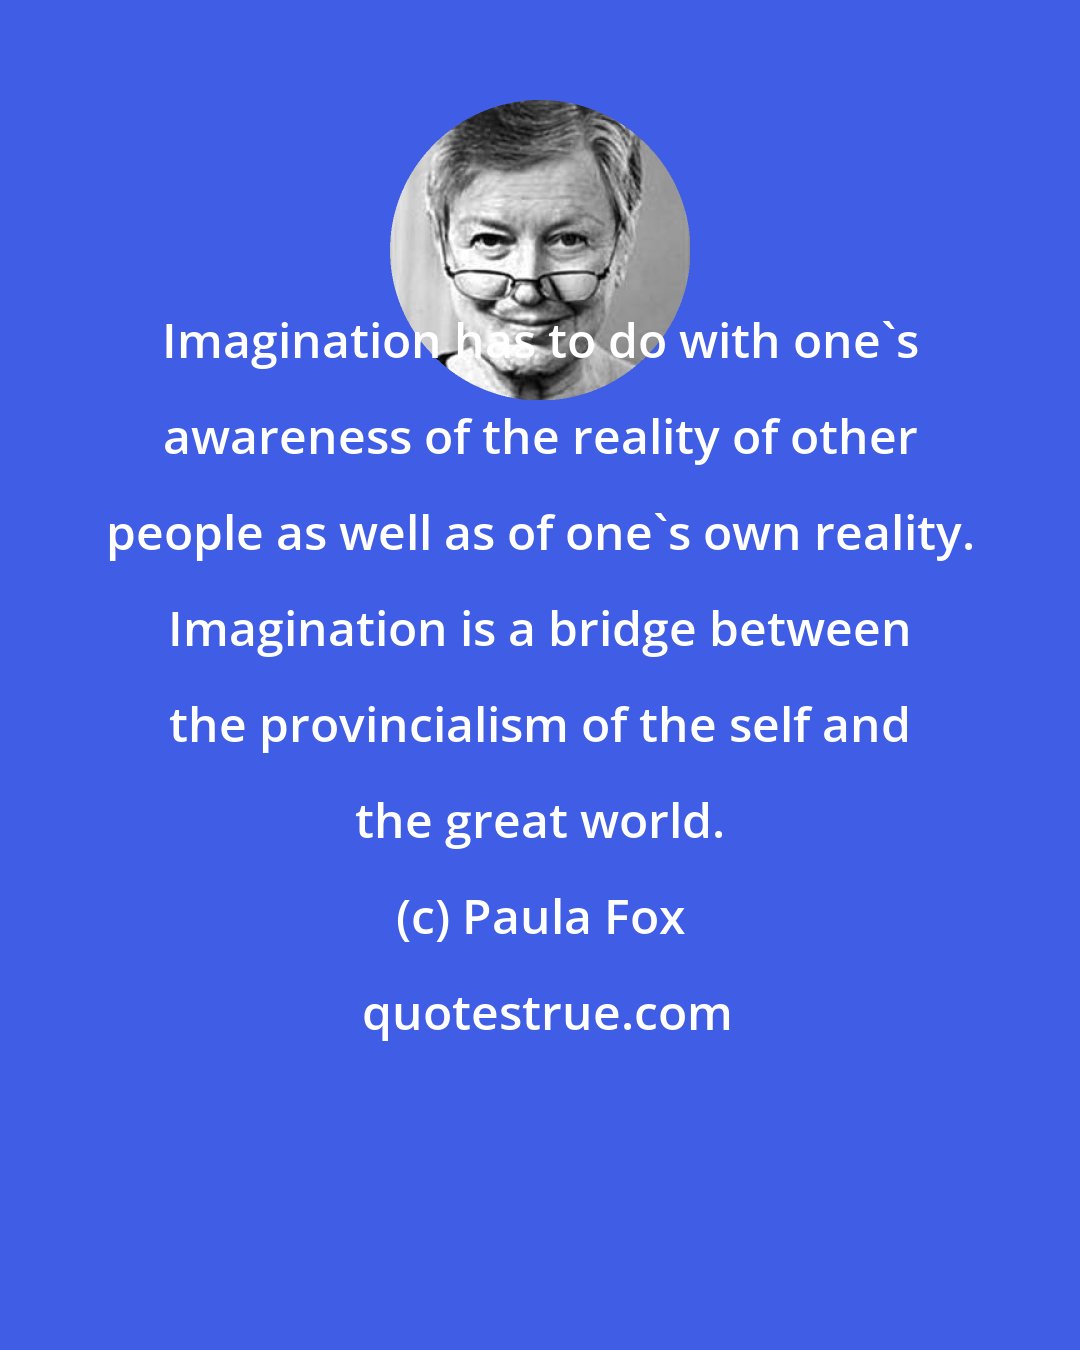 Paula Fox: Imagination has to do with one's awareness of the reality of other people as well as of one's own reality. Imagination is a bridge between the provincialism of the self and the great world.